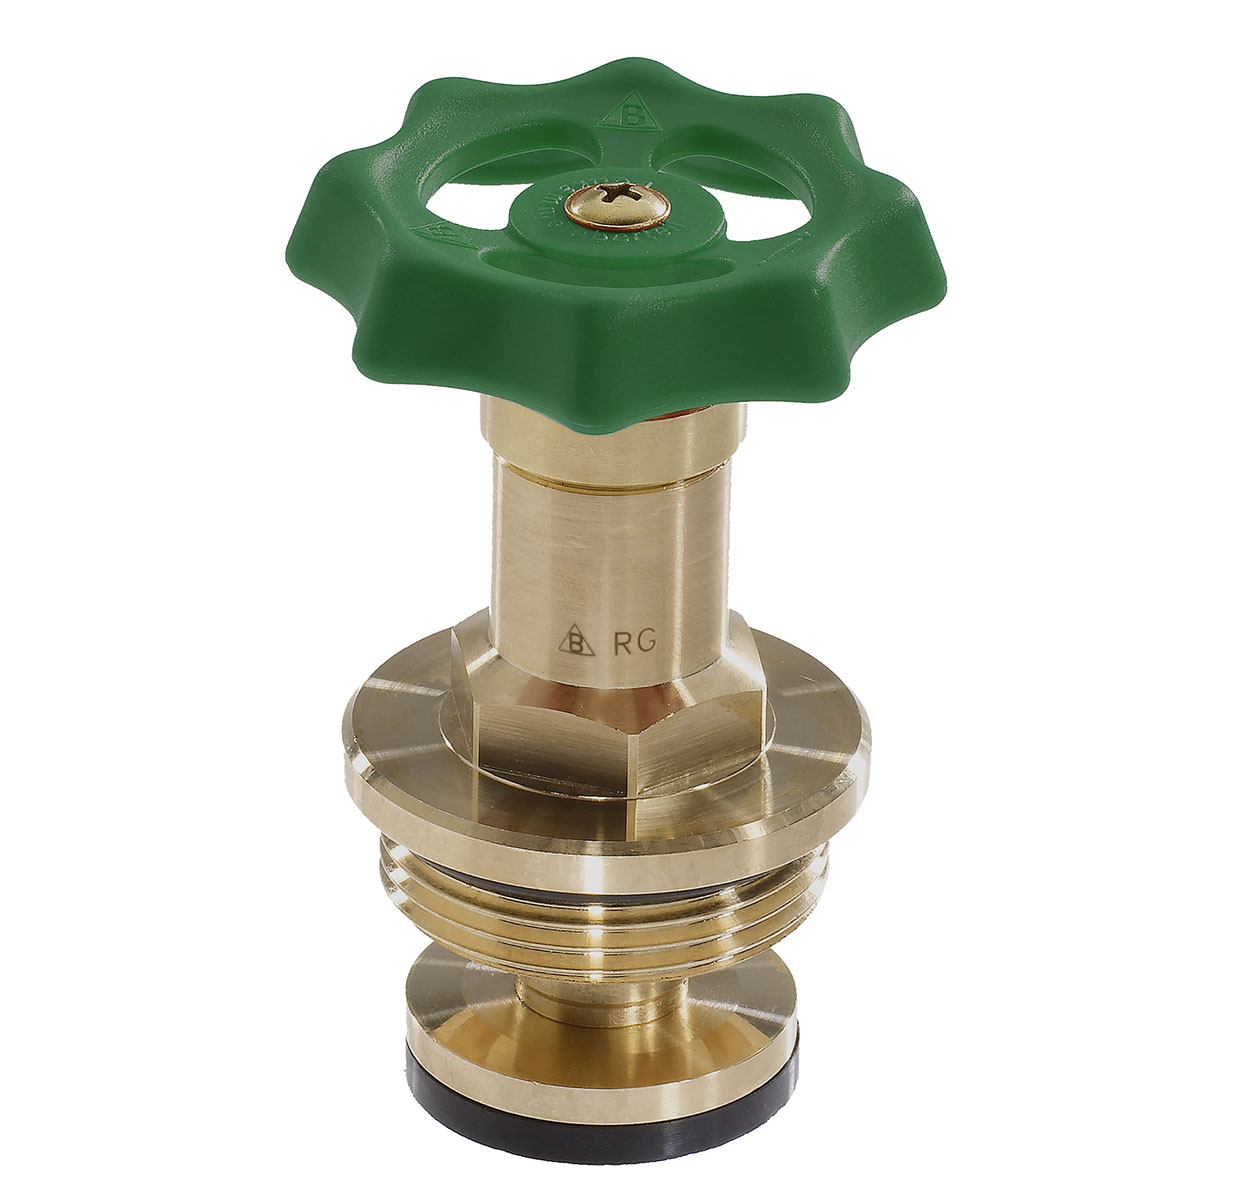 1274200 - Cuphin Upper-part with grease chamber SOFT-drive-system, for free-flow valves, non-rising spindle